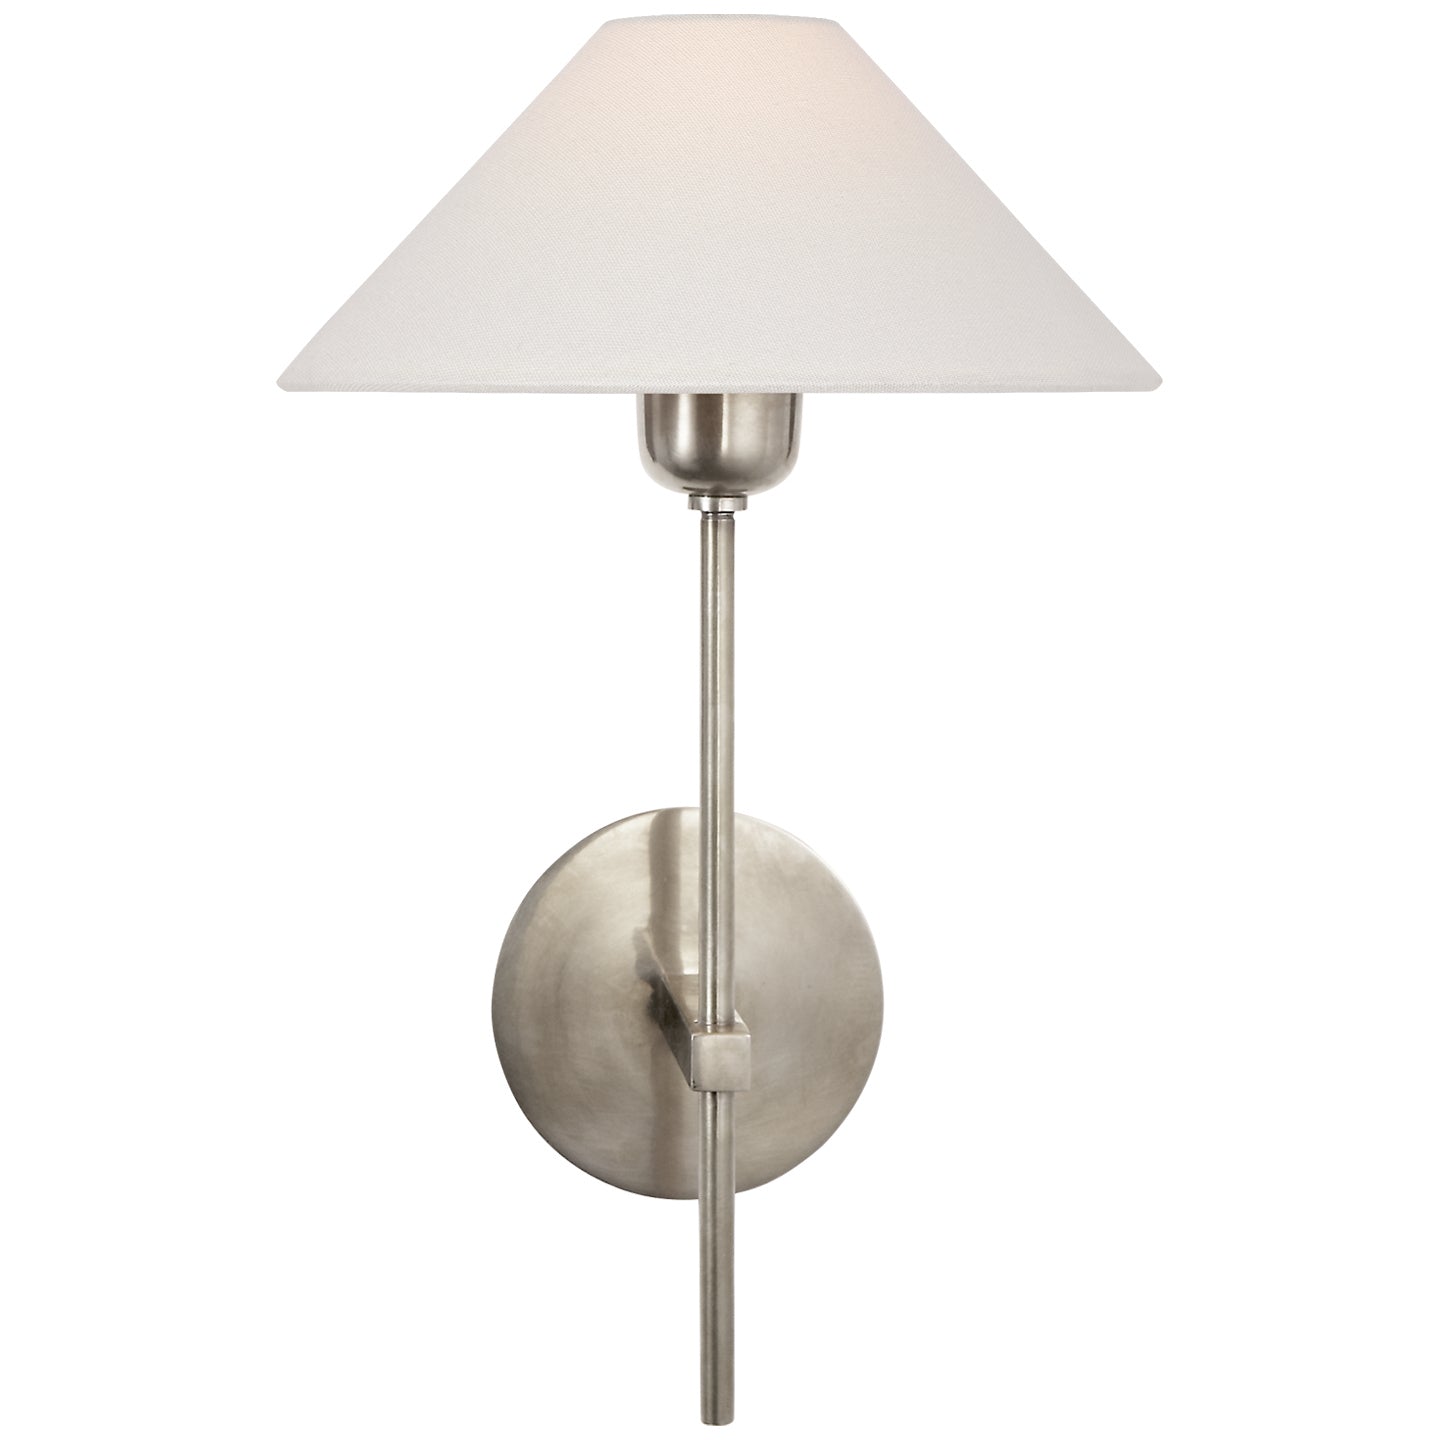 Load image into Gallery viewer, Visual Comfort Signature - SP 2022AN-L - One Light Wall Sconce - Hackney - Antique Nickel
